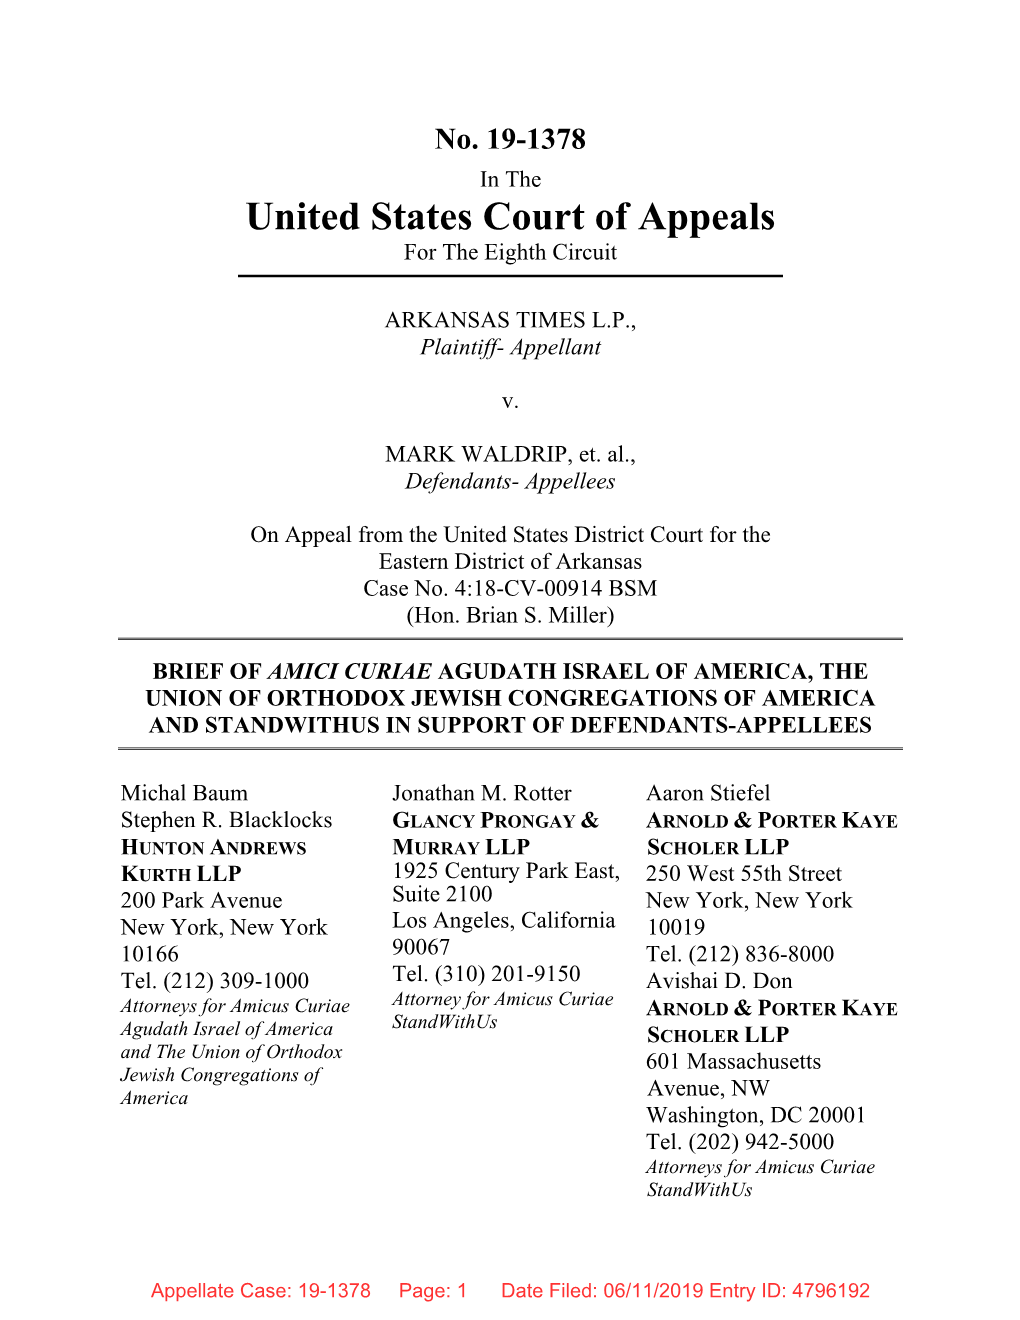 Agudath Israel of America, the Union of Orthodox Jewish Congregations of America and Standwithus in Support of Defendants-Appellees